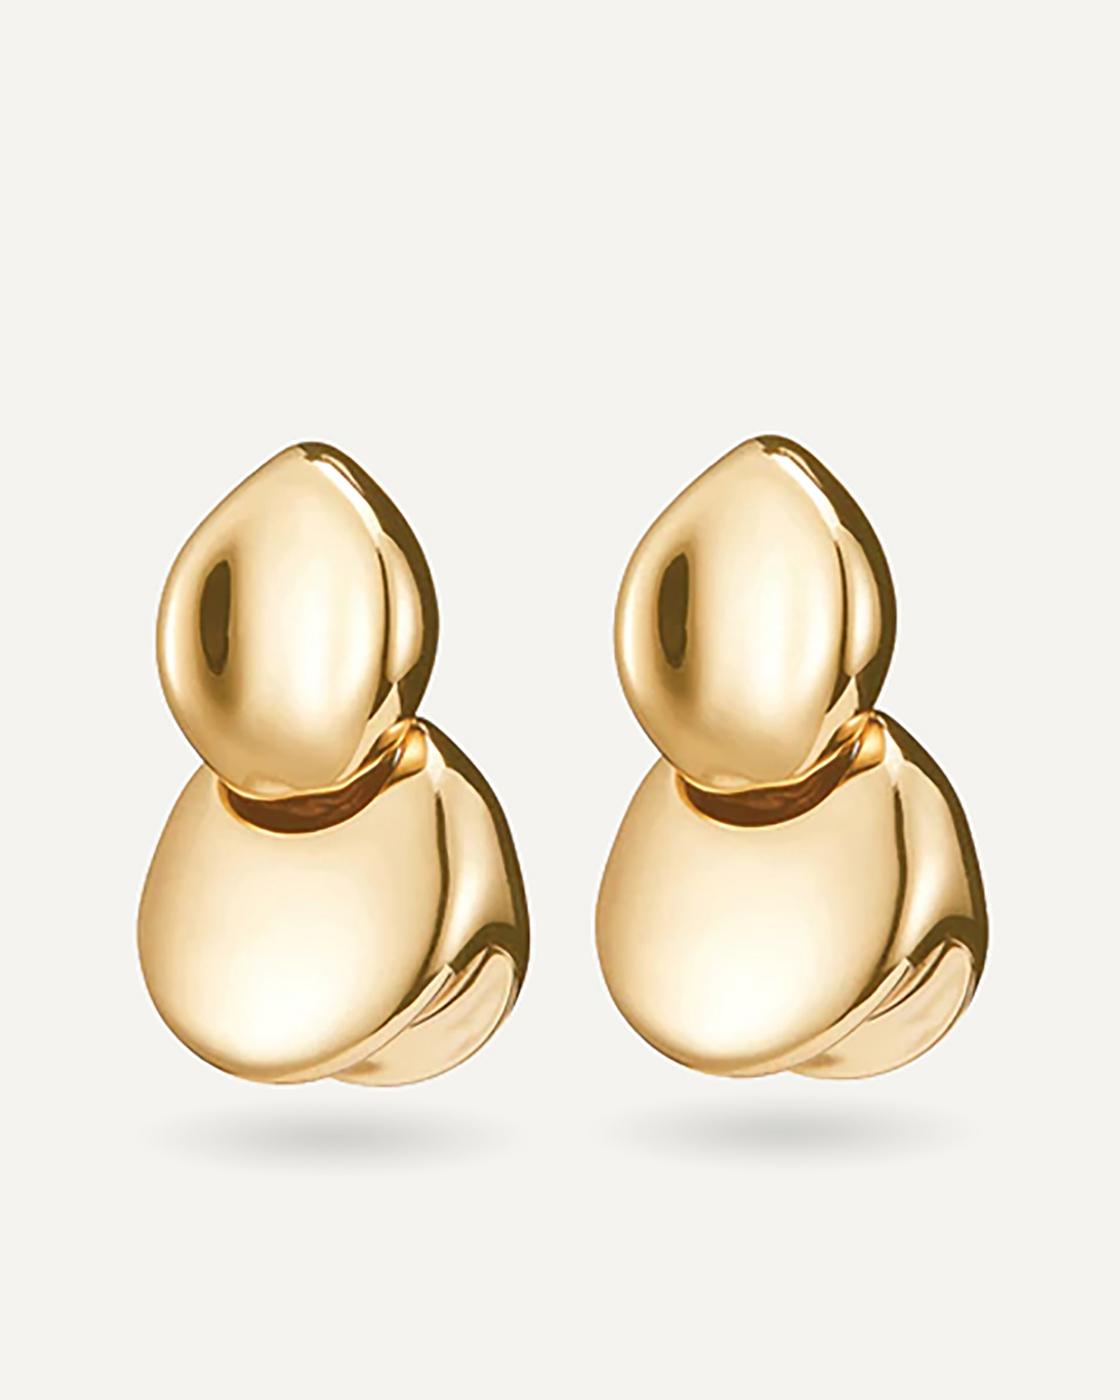 Toni Gold-Plated Toni Gold-Plated Drop and Stud Earrings